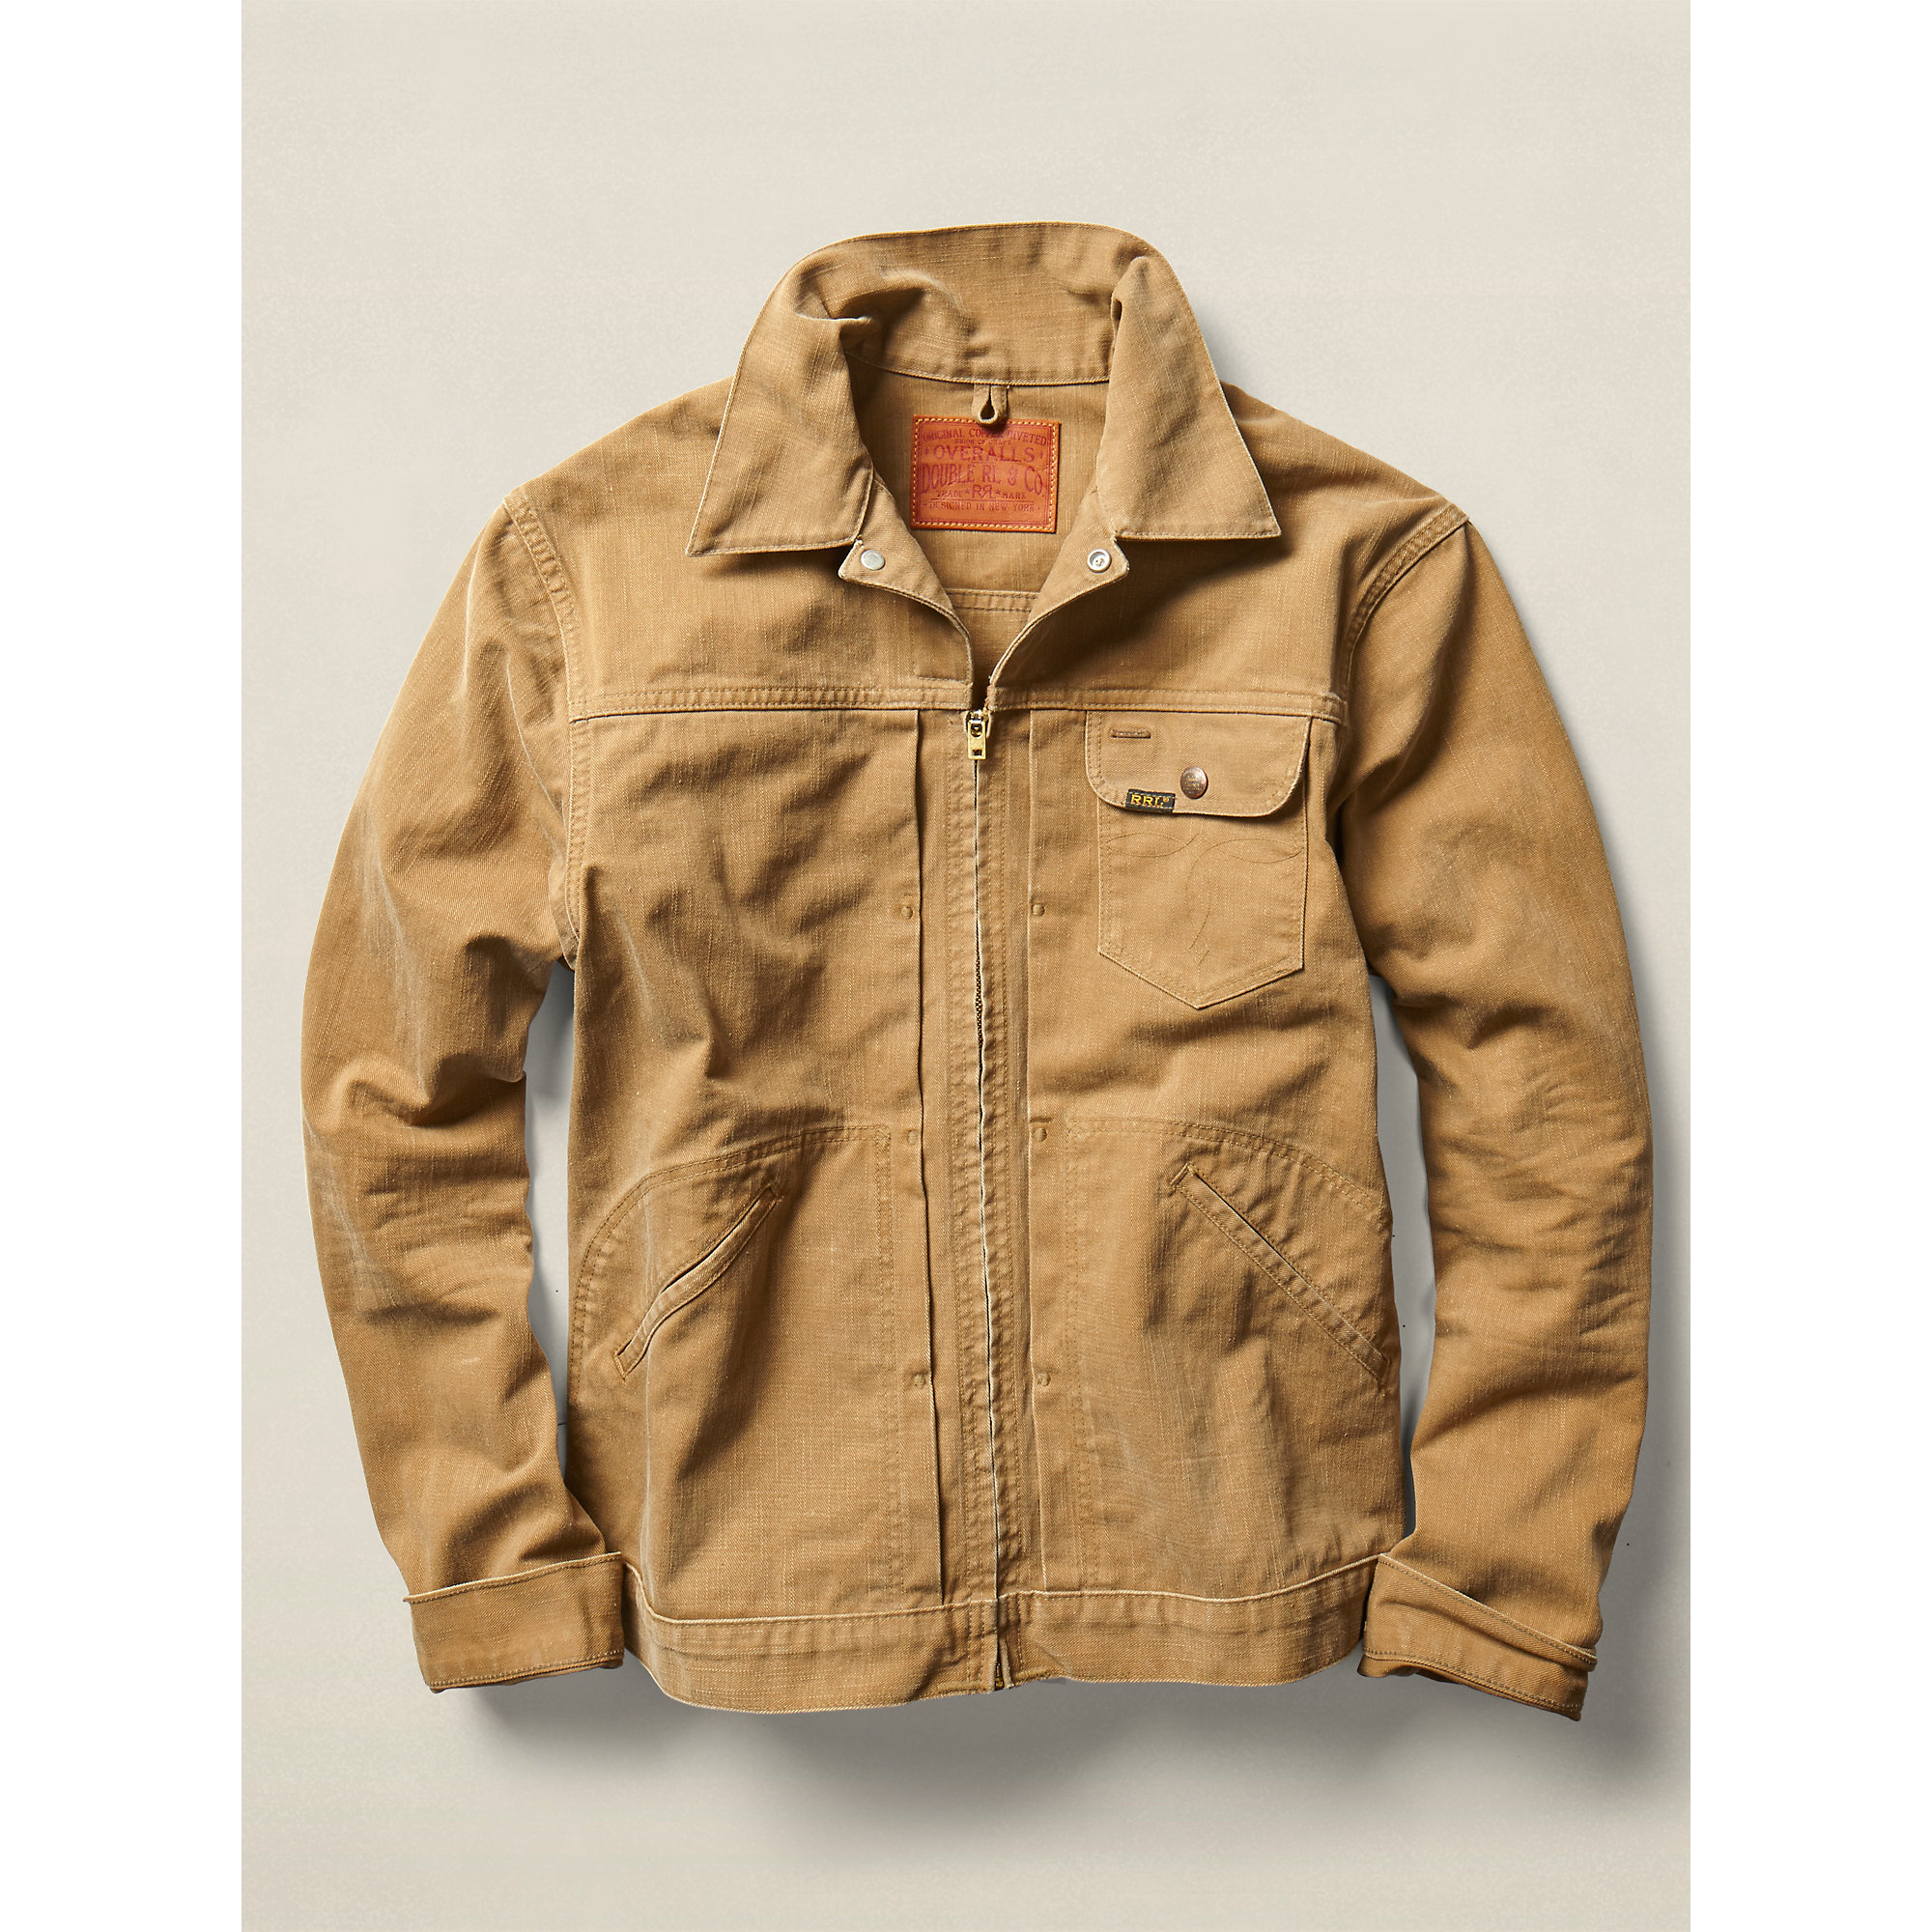 Lyst - Rrl Cotton Twill Jacket in Brown for Men